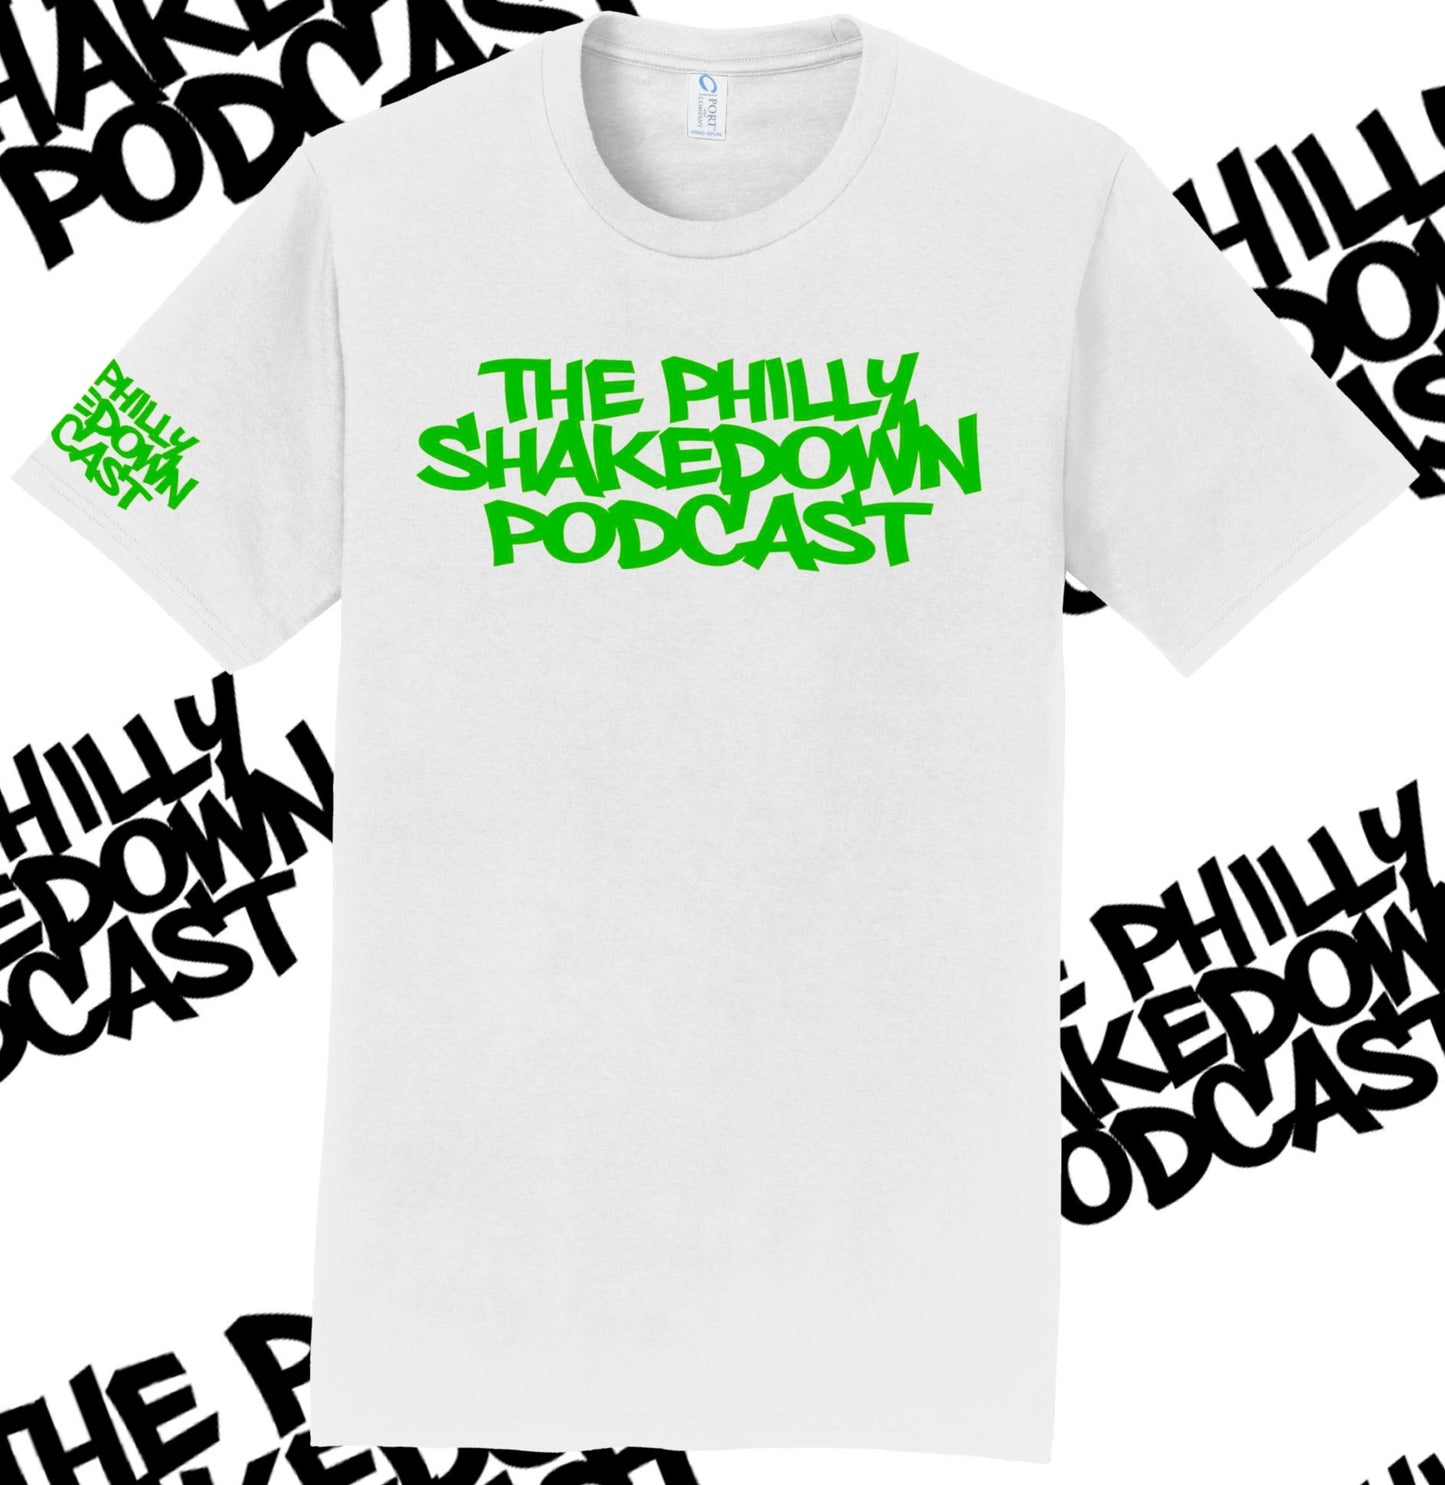 The Philly ShakeDown Podcast 100% Ring Spun Cotton Tee